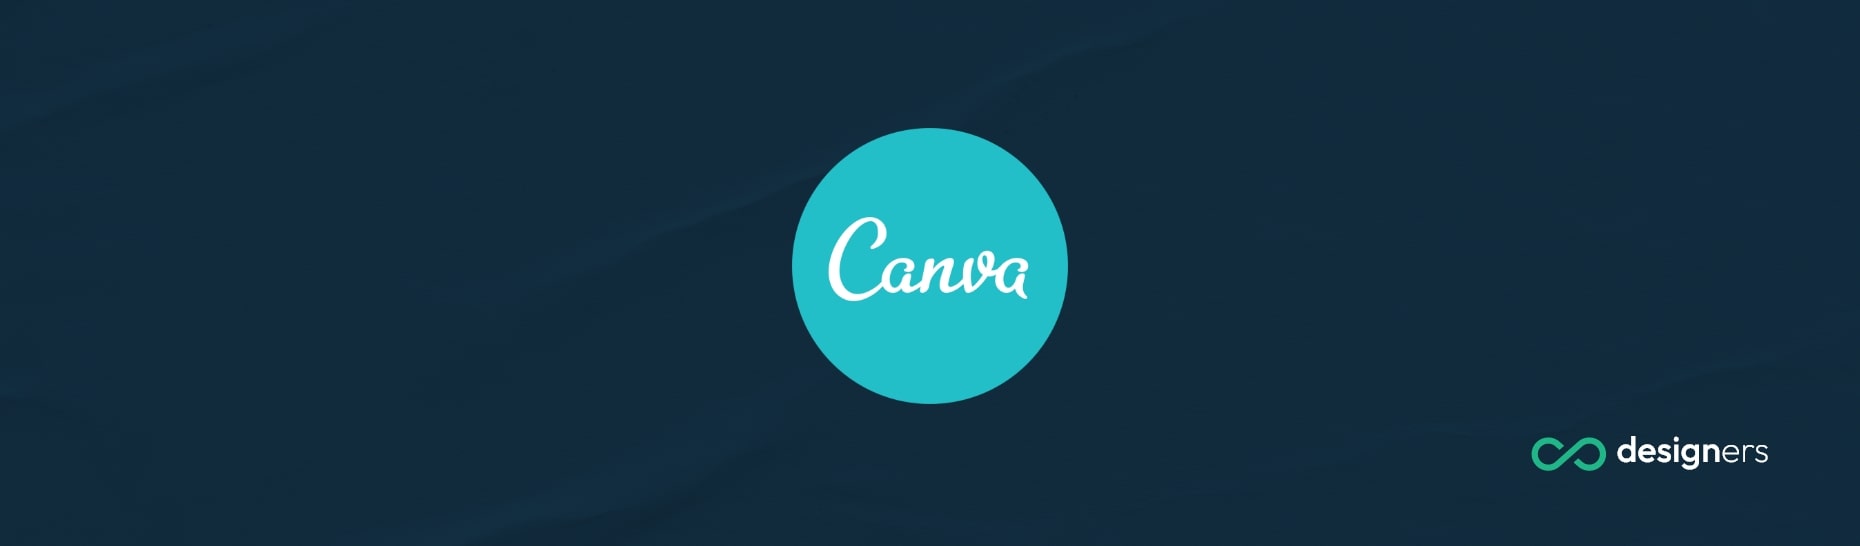 Is Canva Compatible With Keynote?